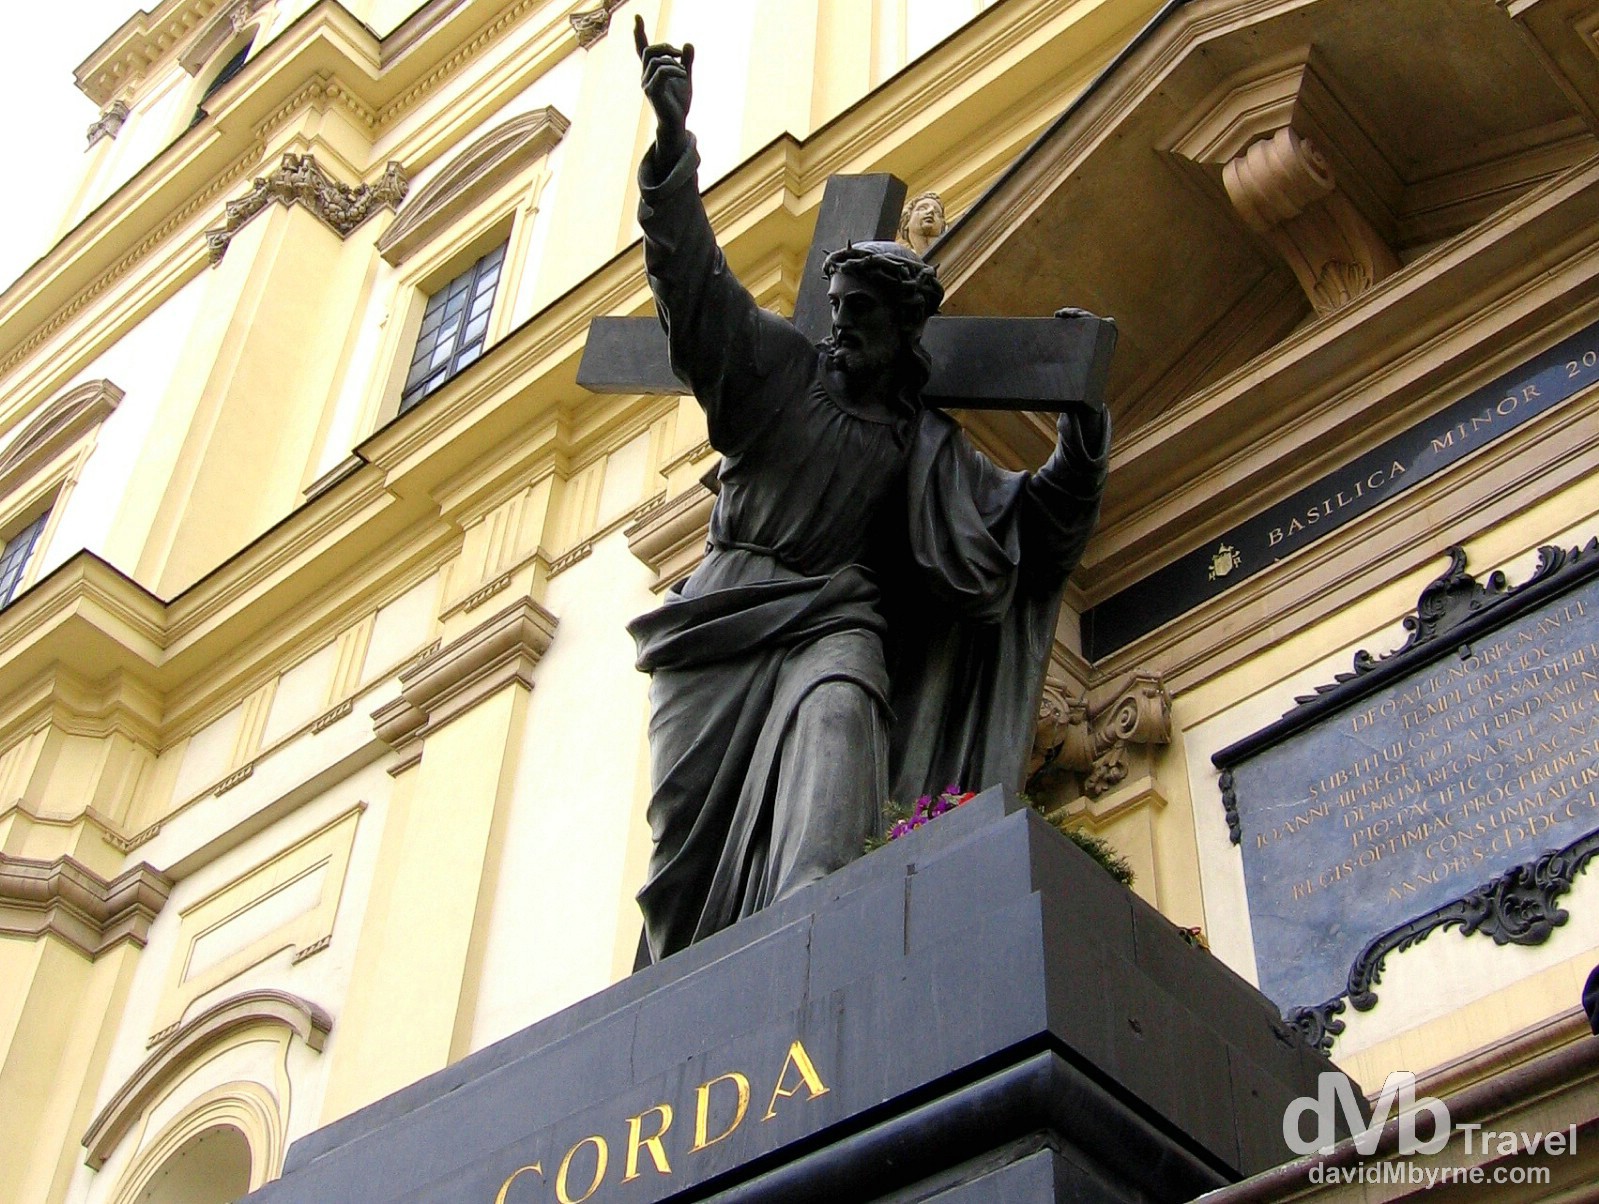 The statue of Christ Bearing His Cross outside the Church of the Holy Cross, in Warsaw, Poland. March 5, 2006.